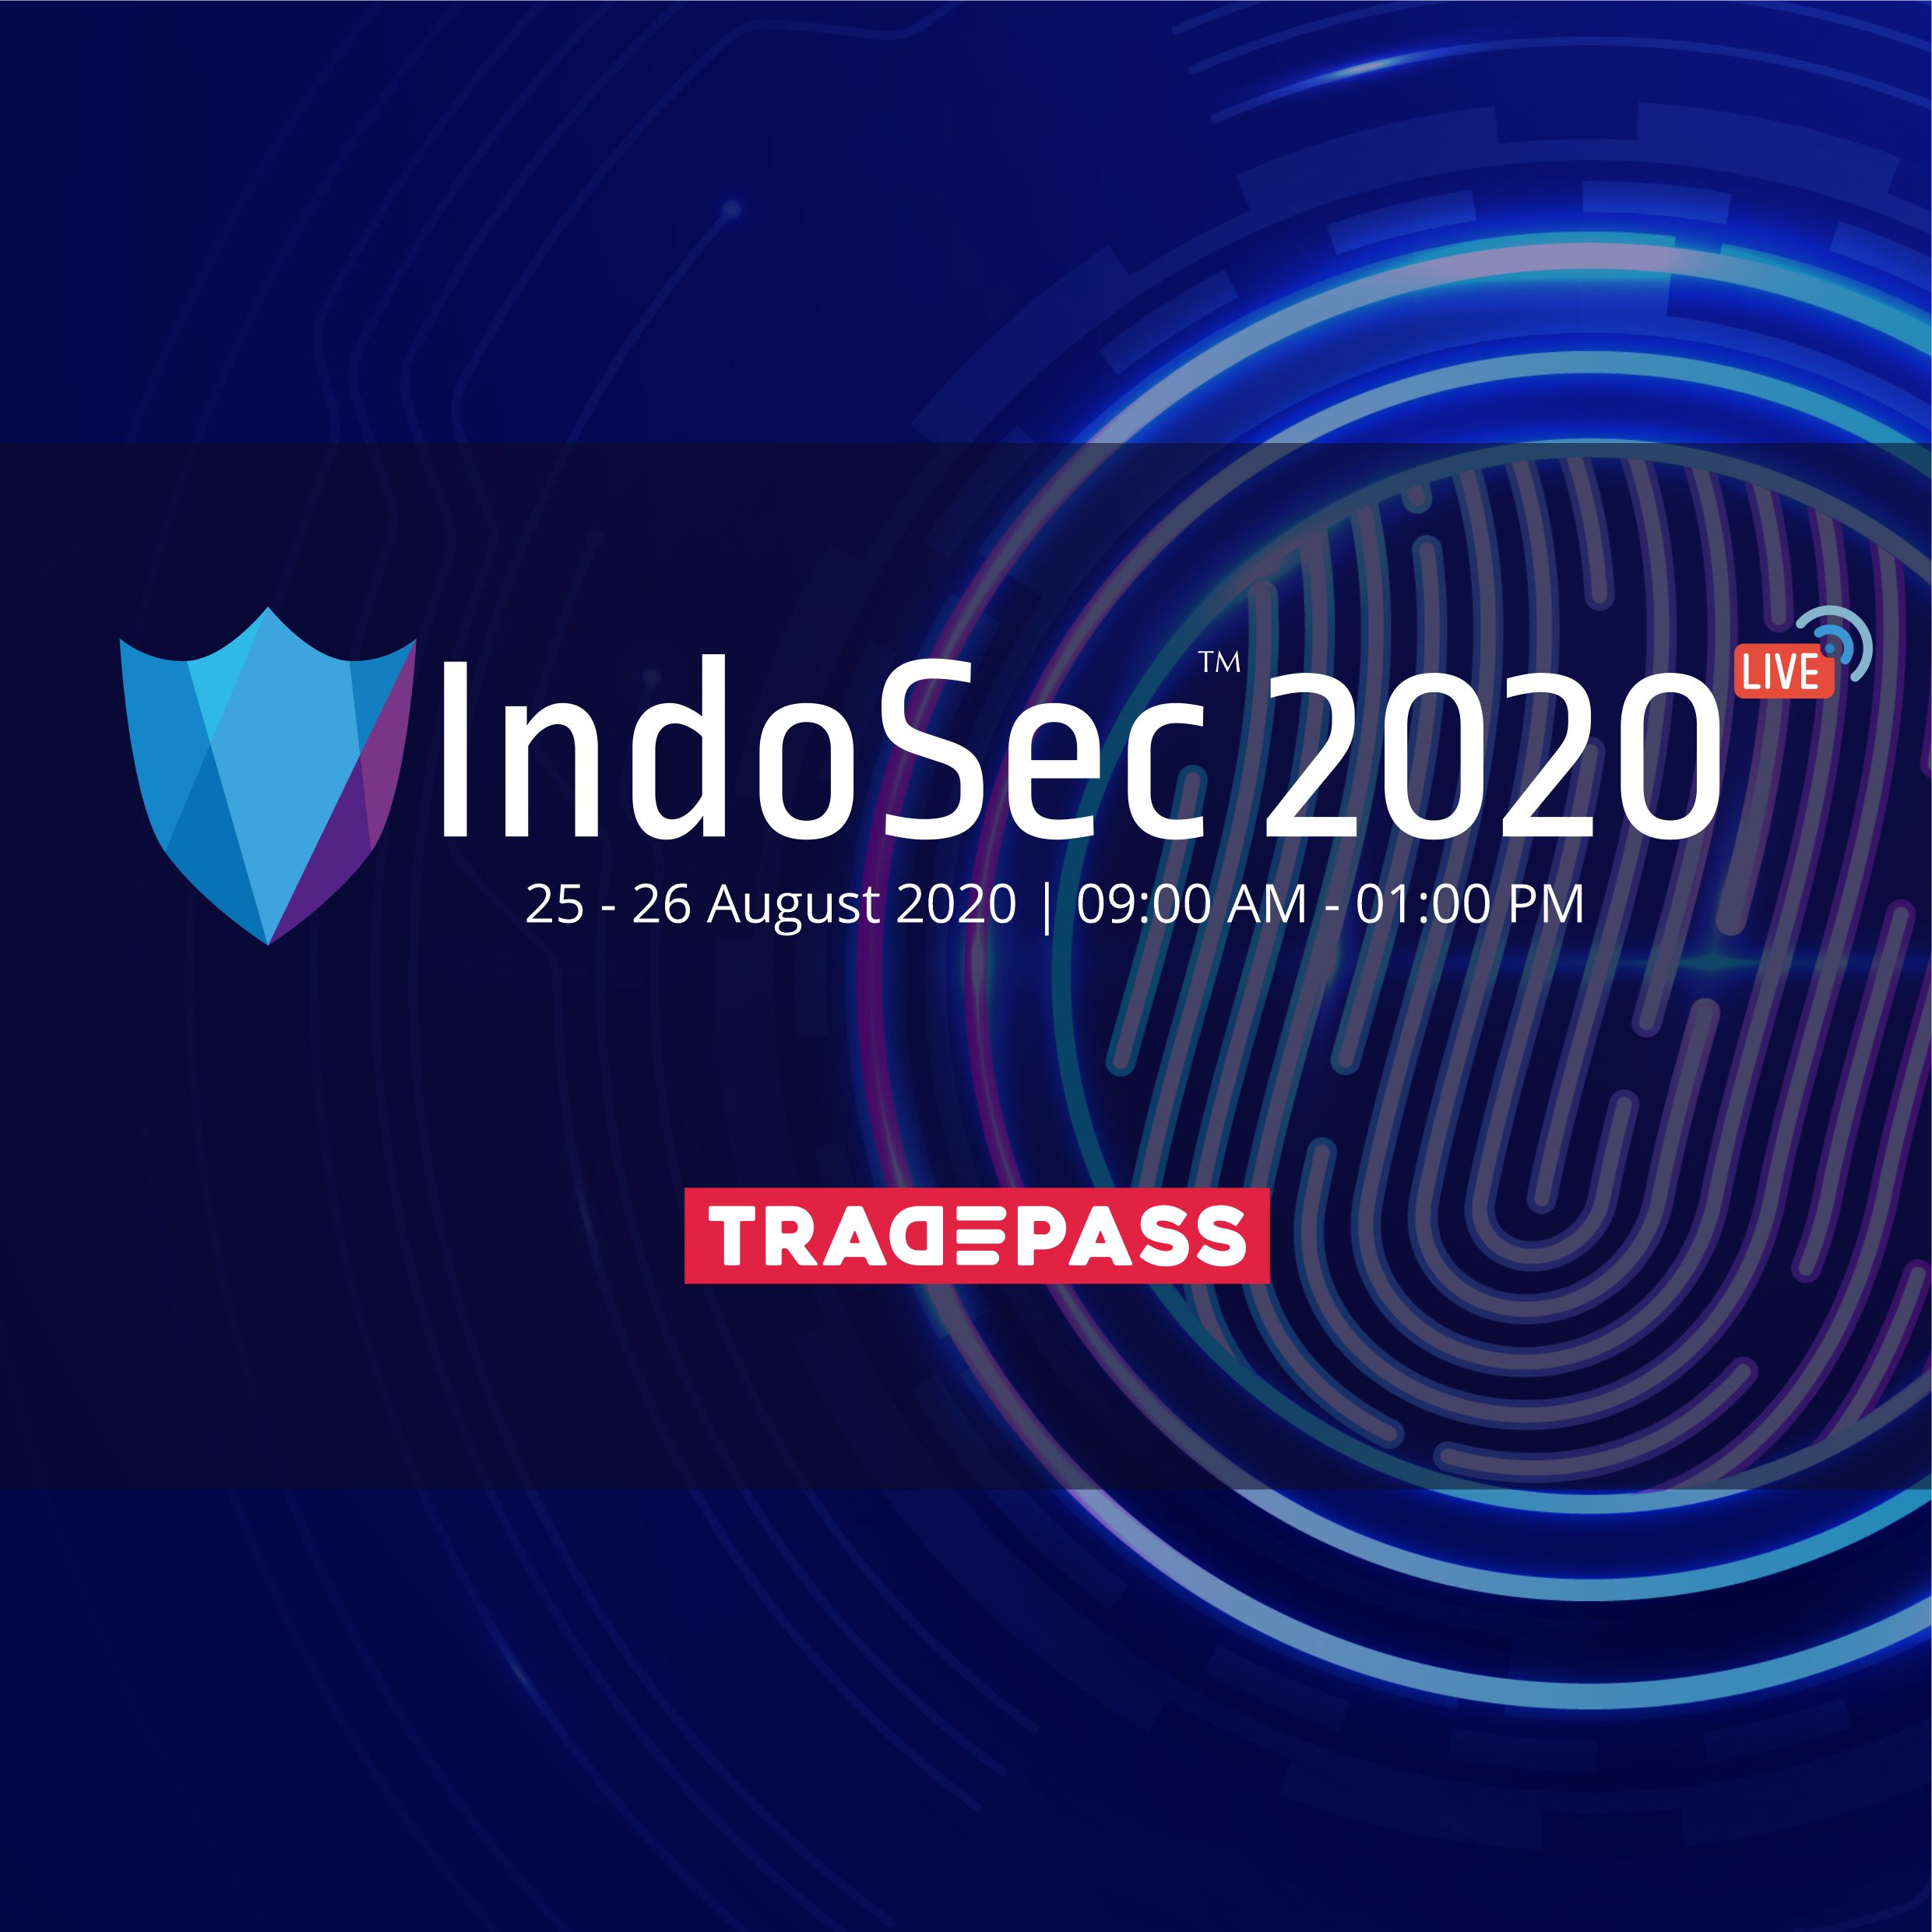 Article about 3rd Annual IndoSec Summit LIVE